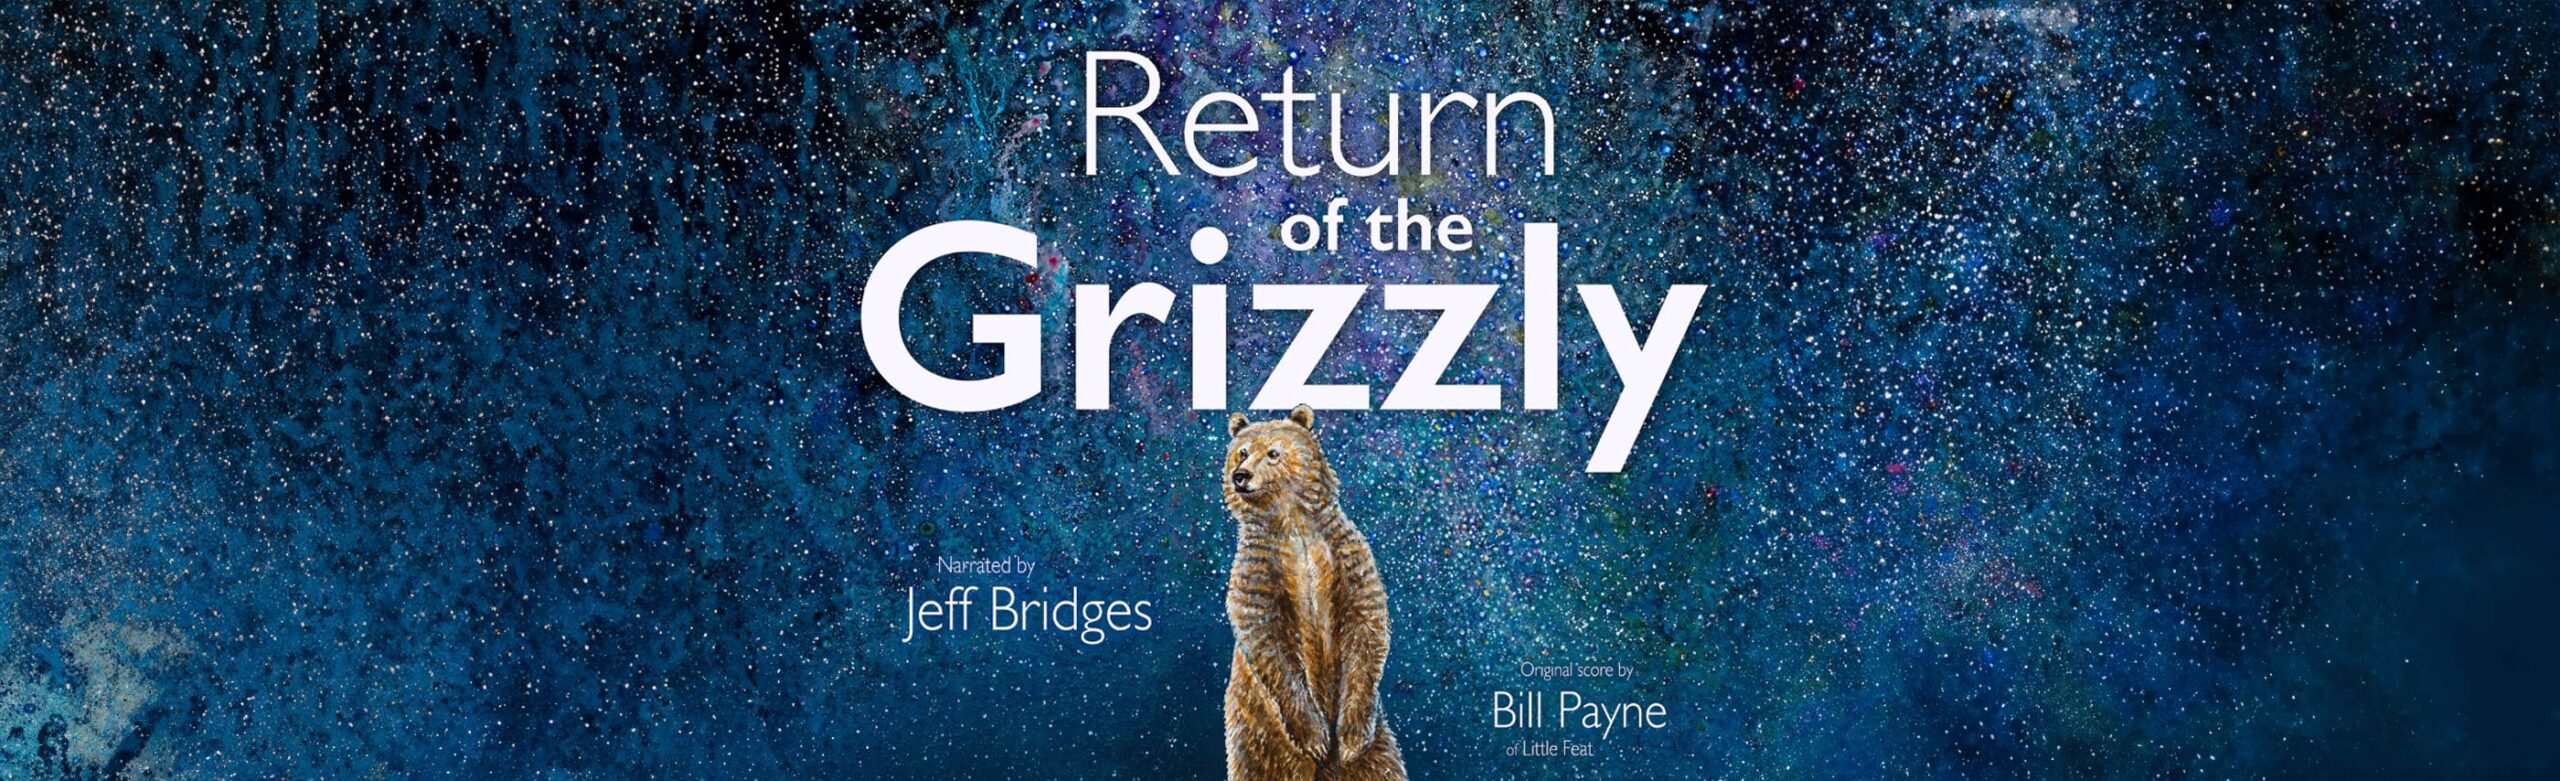 A Celebration of the Grizzly